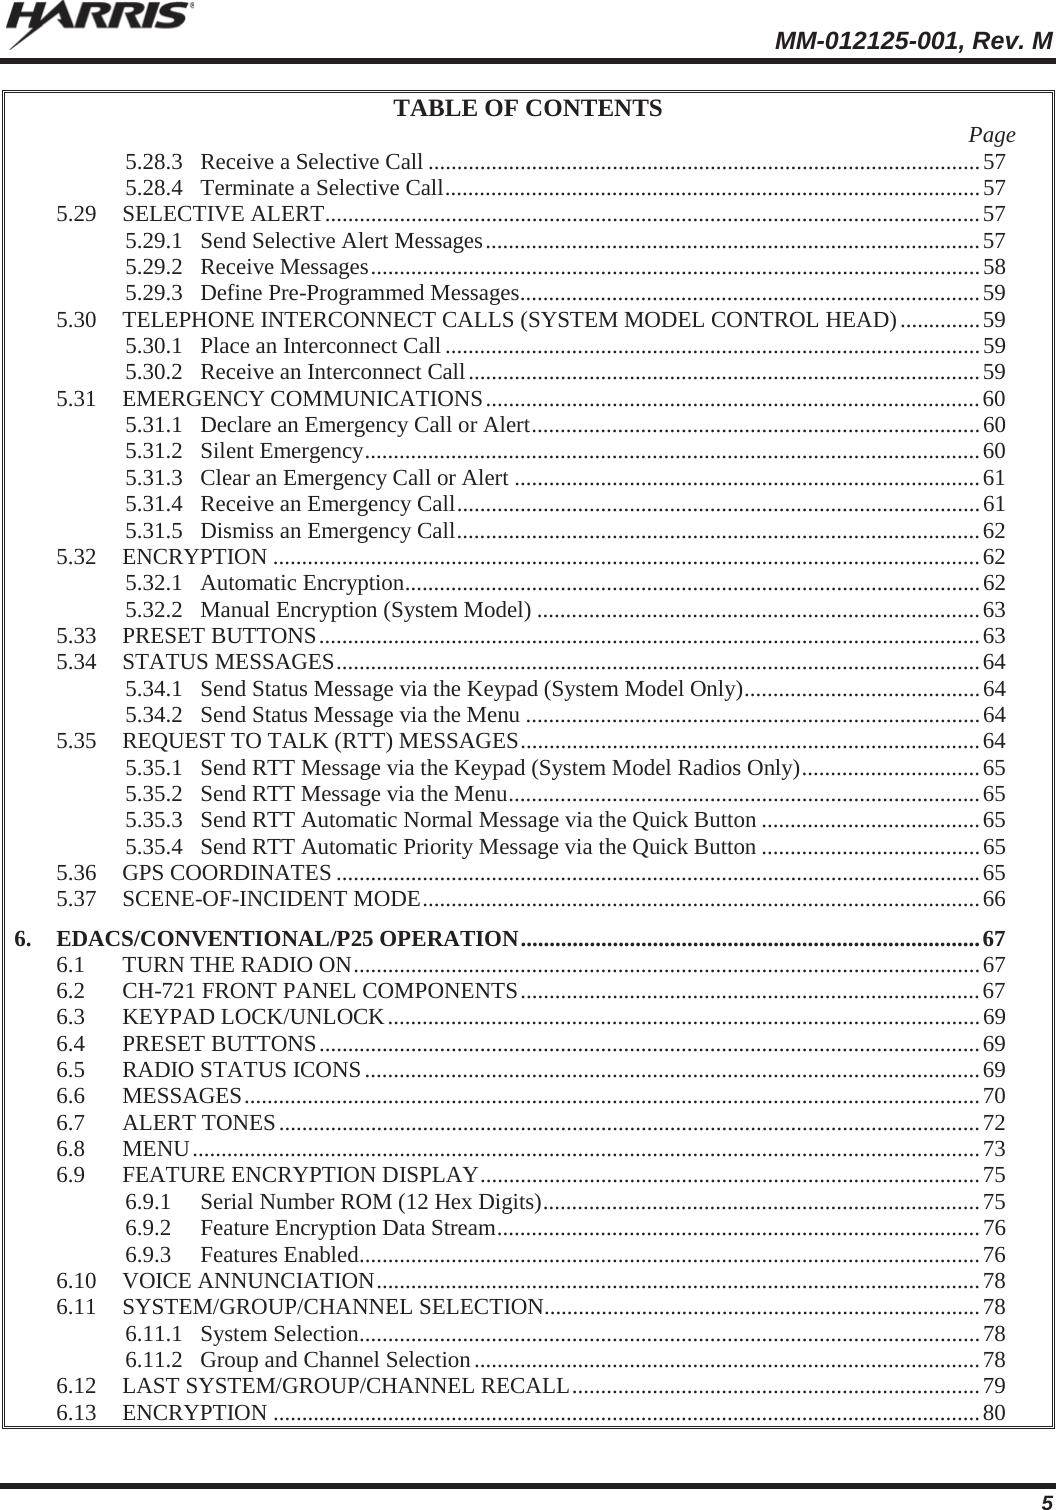  MM-012125-001, Rev. M 5 TABLE OF CONTENTS  Page 5.28.3 Receive a Selective Call ................................................................................................ 57 5.28.4 Terminate a Selective Call ............................................................................................. 57 5.29 SELECTIVE ALERT .................................................................................................................. 57 5.29.1 Send Selective Alert Messages ...................................................................................... 57 5.29.2 Receive Messages .......................................................................................................... 58 5.29.3 Define Pre-Programmed Messages ................................................................................ 59 5.30 TELEPHONE INTERCONNECT CALLS (SYSTEM MODEL CONTROL HEAD) .............. 59 5.30.1 Place an Interconnect Call ............................................................................................. 59 5.30.2 Receive an Interconnect Call ......................................................................................... 59 5.31 EMERGENCY COMMUNICATIONS ...................................................................................... 60 5.31.1 Declare an Emergency Call or Alert .............................................................................. 60 5.31.2 Silent Emergency ........................................................................................................... 60 5.31.3 Clear an Emergency Call or Alert ................................................................................. 61 5.31.4 Receive an Emergency Call ........................................................................................... 61 5.31.5 Dismiss an Emergency Call ........................................................................................... 62 5.32 ENCRYPTION ........................................................................................................................... 62 5.32.1 Automatic Encryption .................................................................................................... 62 5.32.2 Manual Encryption (System Model) ............................................................................. 63 5.33 PRESET BUTTONS ................................................................................................................... 63 5.34 STATUS MESSAGES ................................................................................................................ 64 5.34.1 Send Status Message via the Keypad (System Model Only) ......................................... 64 5.34.2 Send Status Message via the Menu ............................................................................... 64 5.35 REQUEST TO TALK (RTT) MESSAGES ................................................................................ 64 5.35.1 Send RTT Message via the Keypad (System Model Radios Only) ............................... 65 5.35.2 Send RTT Message via the Menu .................................................................................. 65 5.35.3 Send RTT Automatic Normal Message via the Quick Button ...................................... 65 5.35.4 Send RTT Automatic Priority Message via the Quick Button ...................................... 65 5.36 GPS COORDINATES ................................................................................................................ 65 5.37 SCENE-OF-INCIDENT MODE ................................................................................................. 66 6. EDACS/CONVENTIONAL/P25 OPERATION ................................................................................ 67 6.1 TURN THE RADIO ON ............................................................................................................. 67 6.2 CH-721 FRONT PANEL COMPONENTS ................................................................................ 67 6.3 KEYPAD  LOCK/UNLOCK ....................................................................................................... 69 6.4 PRESET BUTTONS ................................................................................................................... 69 6.5 RADIO STATUS ICONS ........................................................................................................... 69 6.6 MESSAGES ................................................................................................................................ 70 6.7 ALERT TONES .......................................................................................................................... 72 6.8 MENU ......................................................................................................................................... 73 6.9 FEATURE ENCRYPTION DISPLAY ....................................................................................... 75 6.9.1 Serial Number ROM (12 Hex Digits) ............................................................................ 75 6.9.2 Feature Encryption Data Stream .................................................................................... 76 6.9.3 Features Enabled ............................................................................................................ 76 6.10 VOICE ANNUNCIATION .........................................................................................................  78 6.11 SYSTEM/GROUP/CHANNEL SELECTION............................................................................ 78 6.11.1 System Selection ............................................................................................................ 78 6.11.2 Group and Channel Selection ........................................................................................ 78 6.12 LAST SYSTEM/GROUP/CHANNEL RECALL .......................................................................  79 6.13 ENCRYPTION ........................................................................................................................... 80 